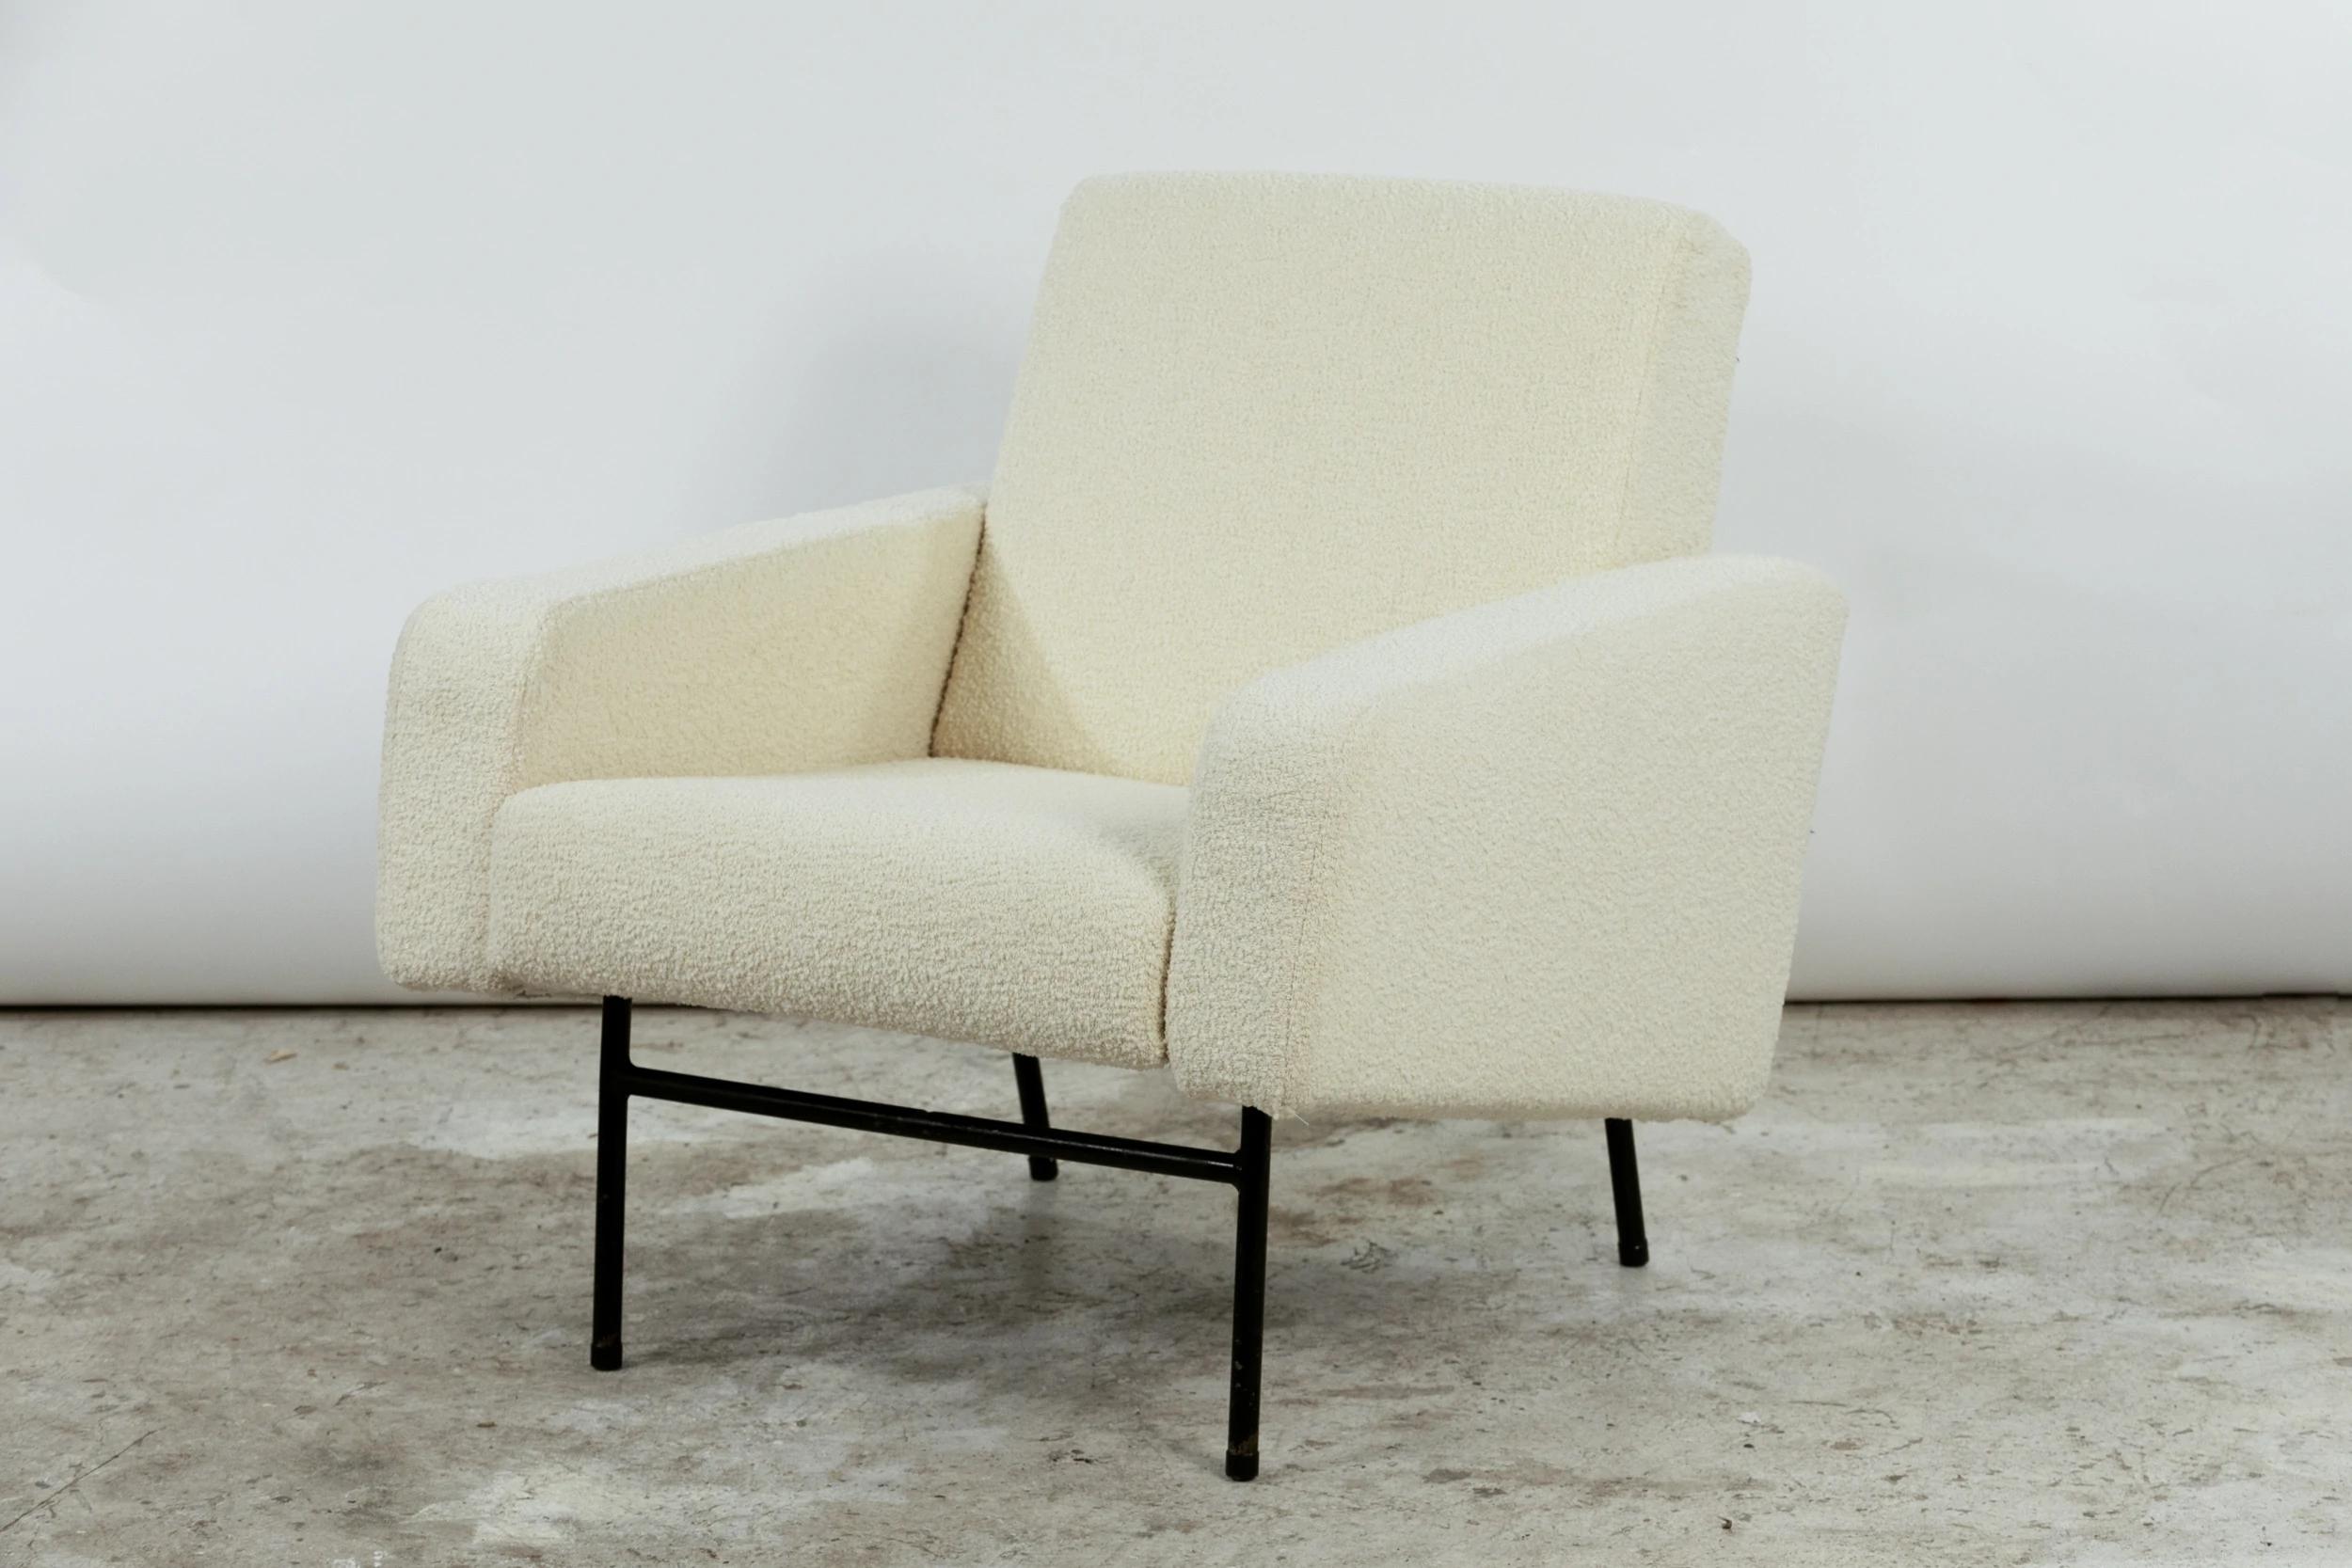 Pair of G 10 armchairs by Pierre Guariche for Airborne, recently upholstered in Bergamo woollen fabric by Bisson Bruneel.
Seat entirely redone (straps, foam, fabric), black lacquered metal legs, in original condition.